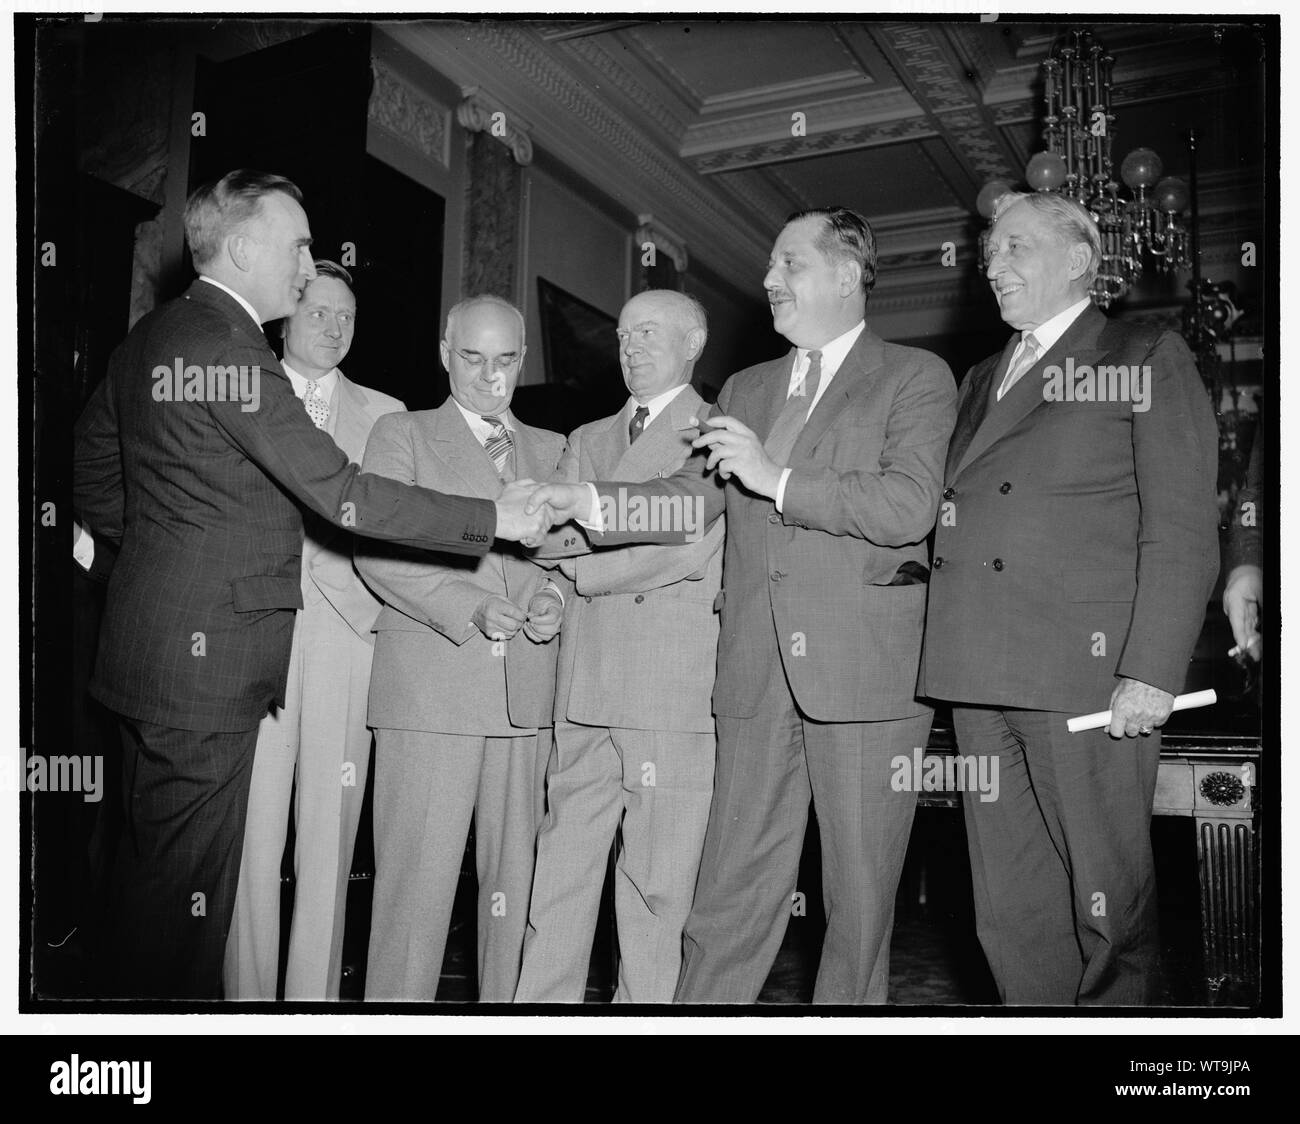 Members congratulate chairman of congressional monopoly committee. Washington, D.C., July 1. Senator Joseph C. O'Mahoney (left) of Wyoming, named Chairman of the Congressional Monopoly Committee at their first meeting today, receives the congratulations of other members of the investigating group. O'Mahoney is the author of the resolution for the inquiry. Pictured, left to right: Senator O'Mahoney, William O. Douglas, S.E.C. Chairman; Rep. Edward C. Eicher, Rep. Hatton W. Sumners, Vice Chairman; Assistant Attorney General Thurman Arnold, and Senator William H. King, 7/1/38 Stock Photo